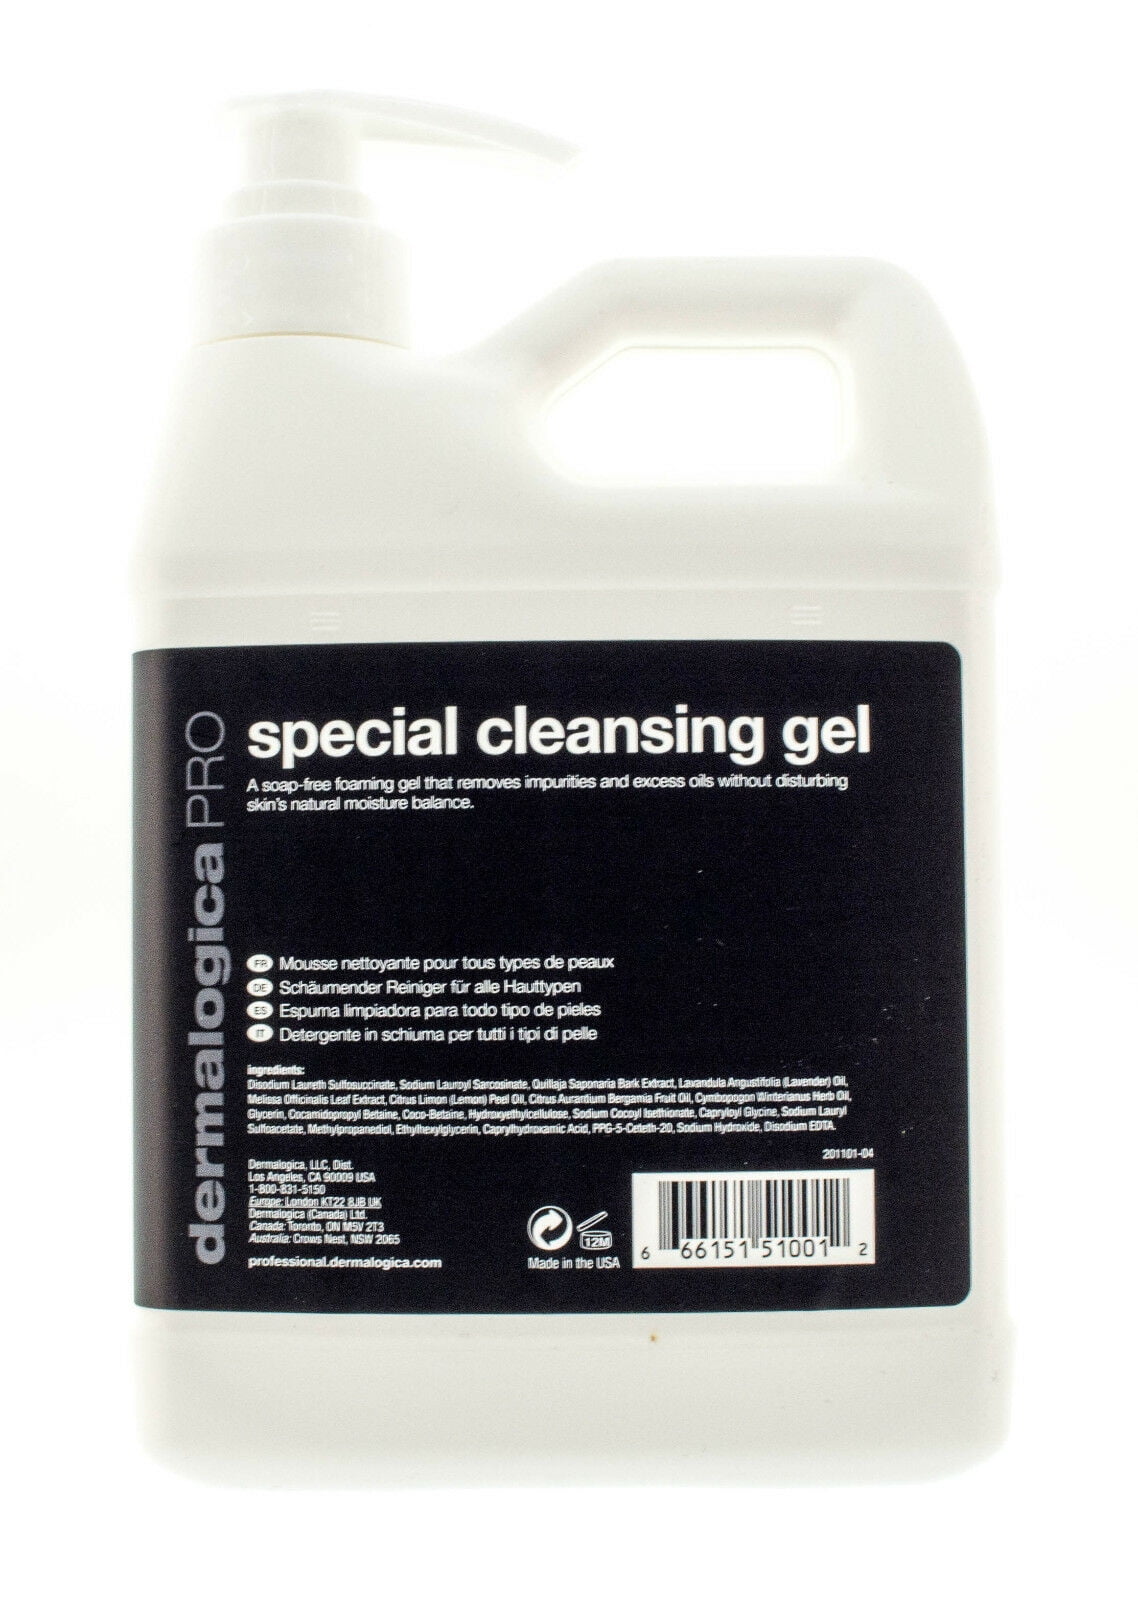 Dermalogica Special Cleansing Gel Pro Size 946 mL NEW AUTH - Walmart.com